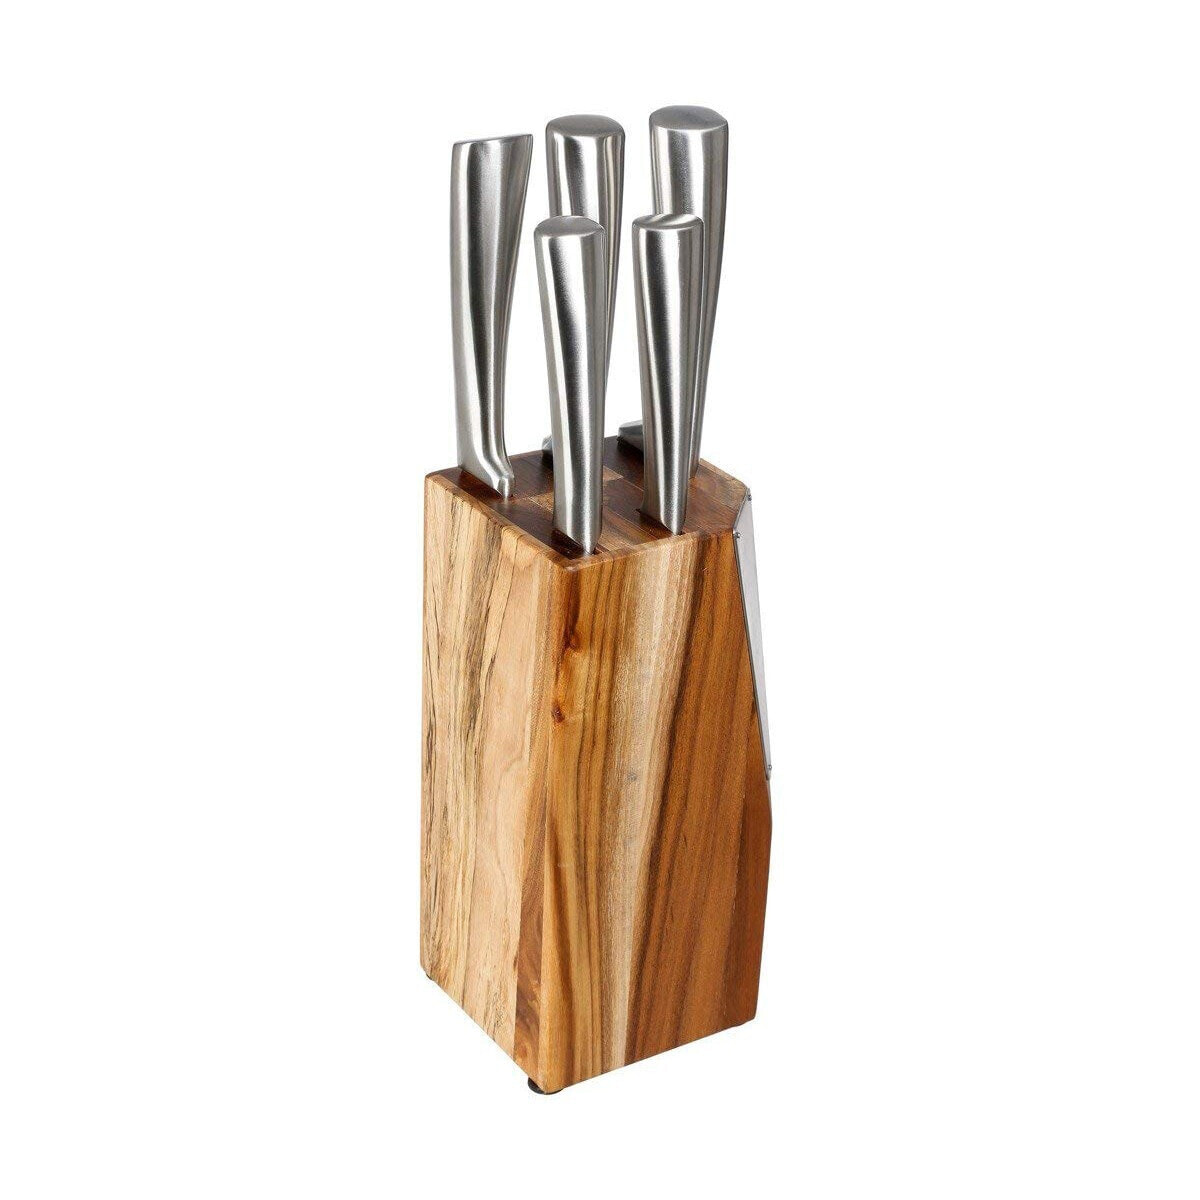 Set of Knives with Wooden Base 5five